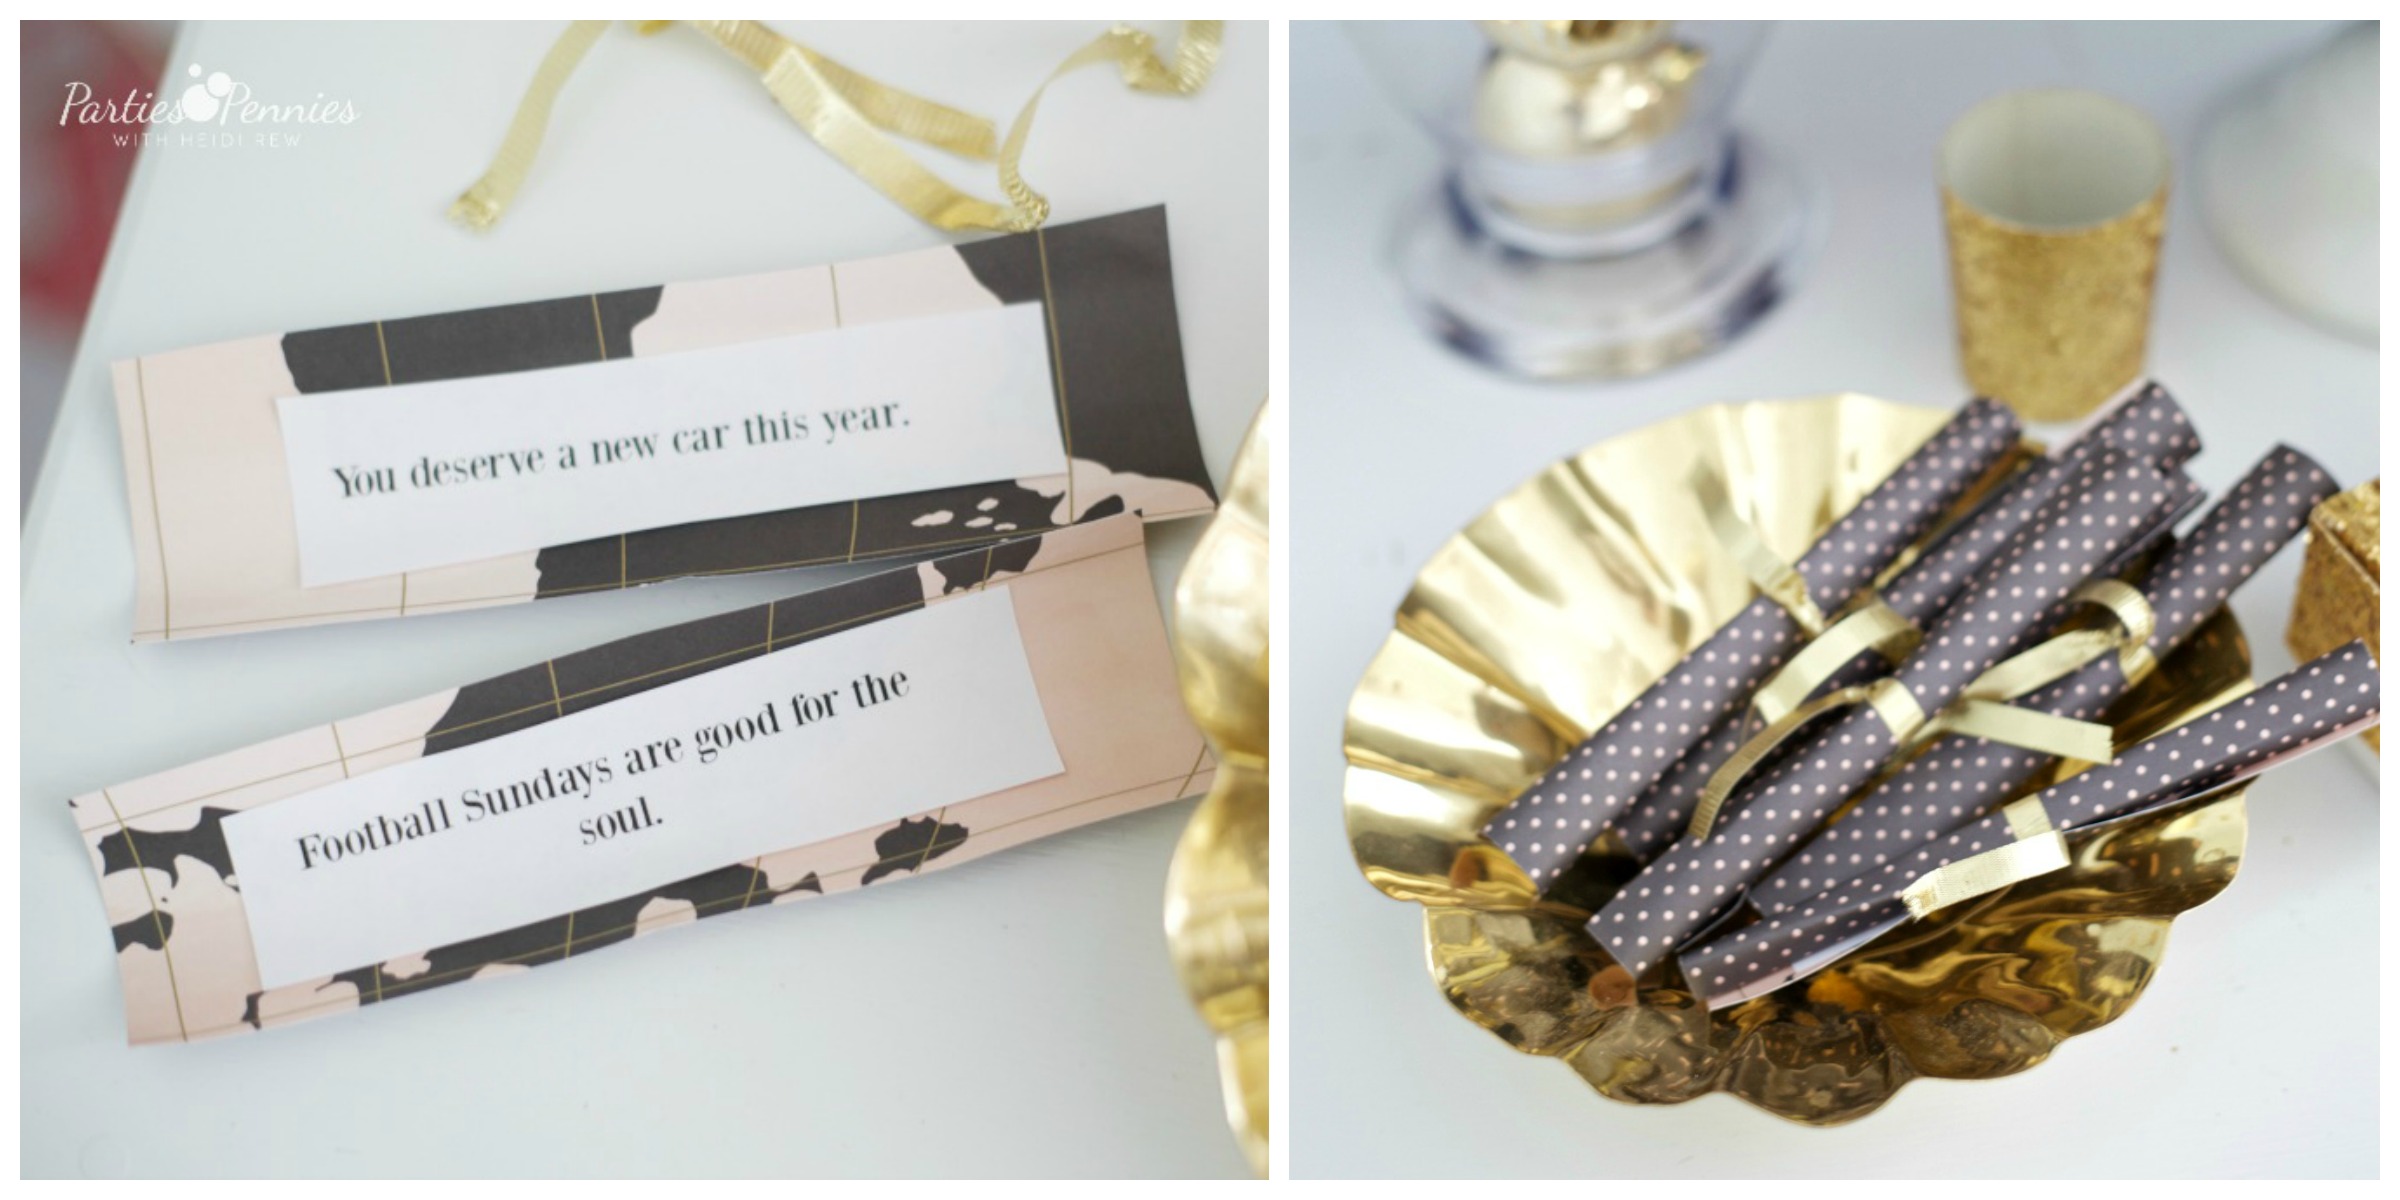 6 Budget-Friendly New Year's Eve Party Ideas by PartiesforPennies.com | Fortune Party Favors | NYE, Navy and Pink,